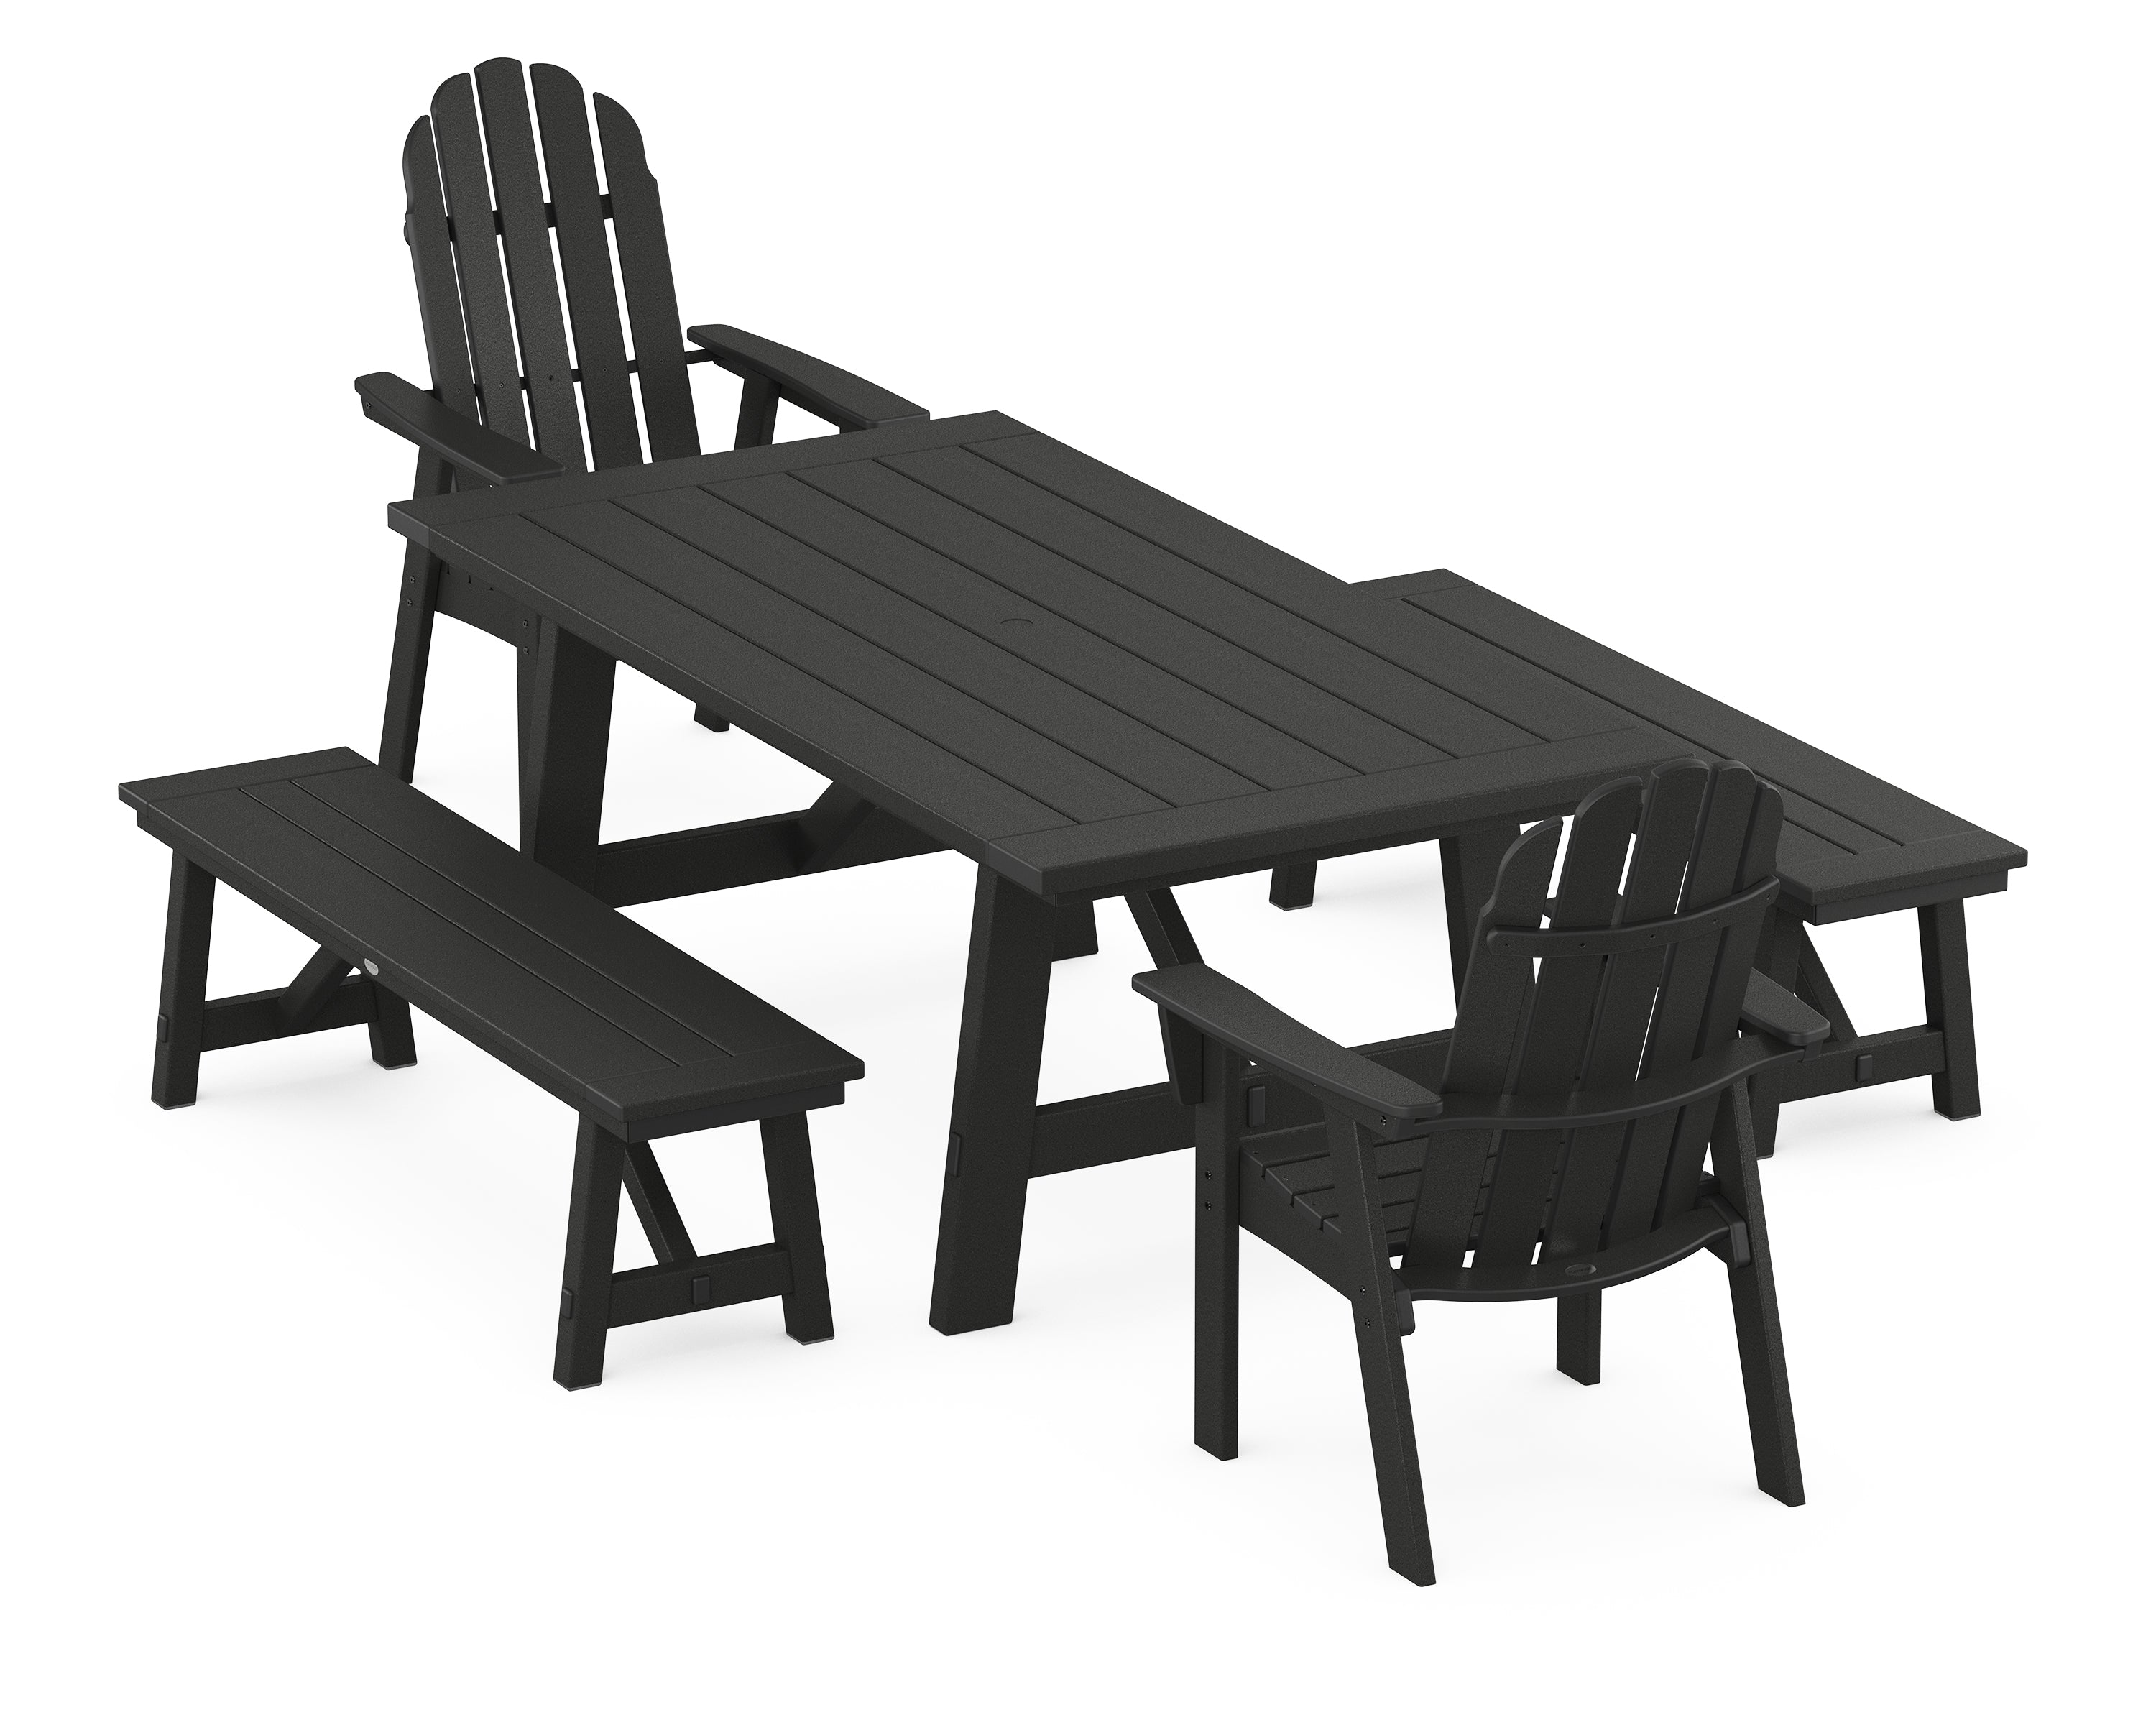 POLYWOOD® Vineyard Curveback Adirondack 5-Piece Rustic Farmhouse Dining Set With Benches in Black